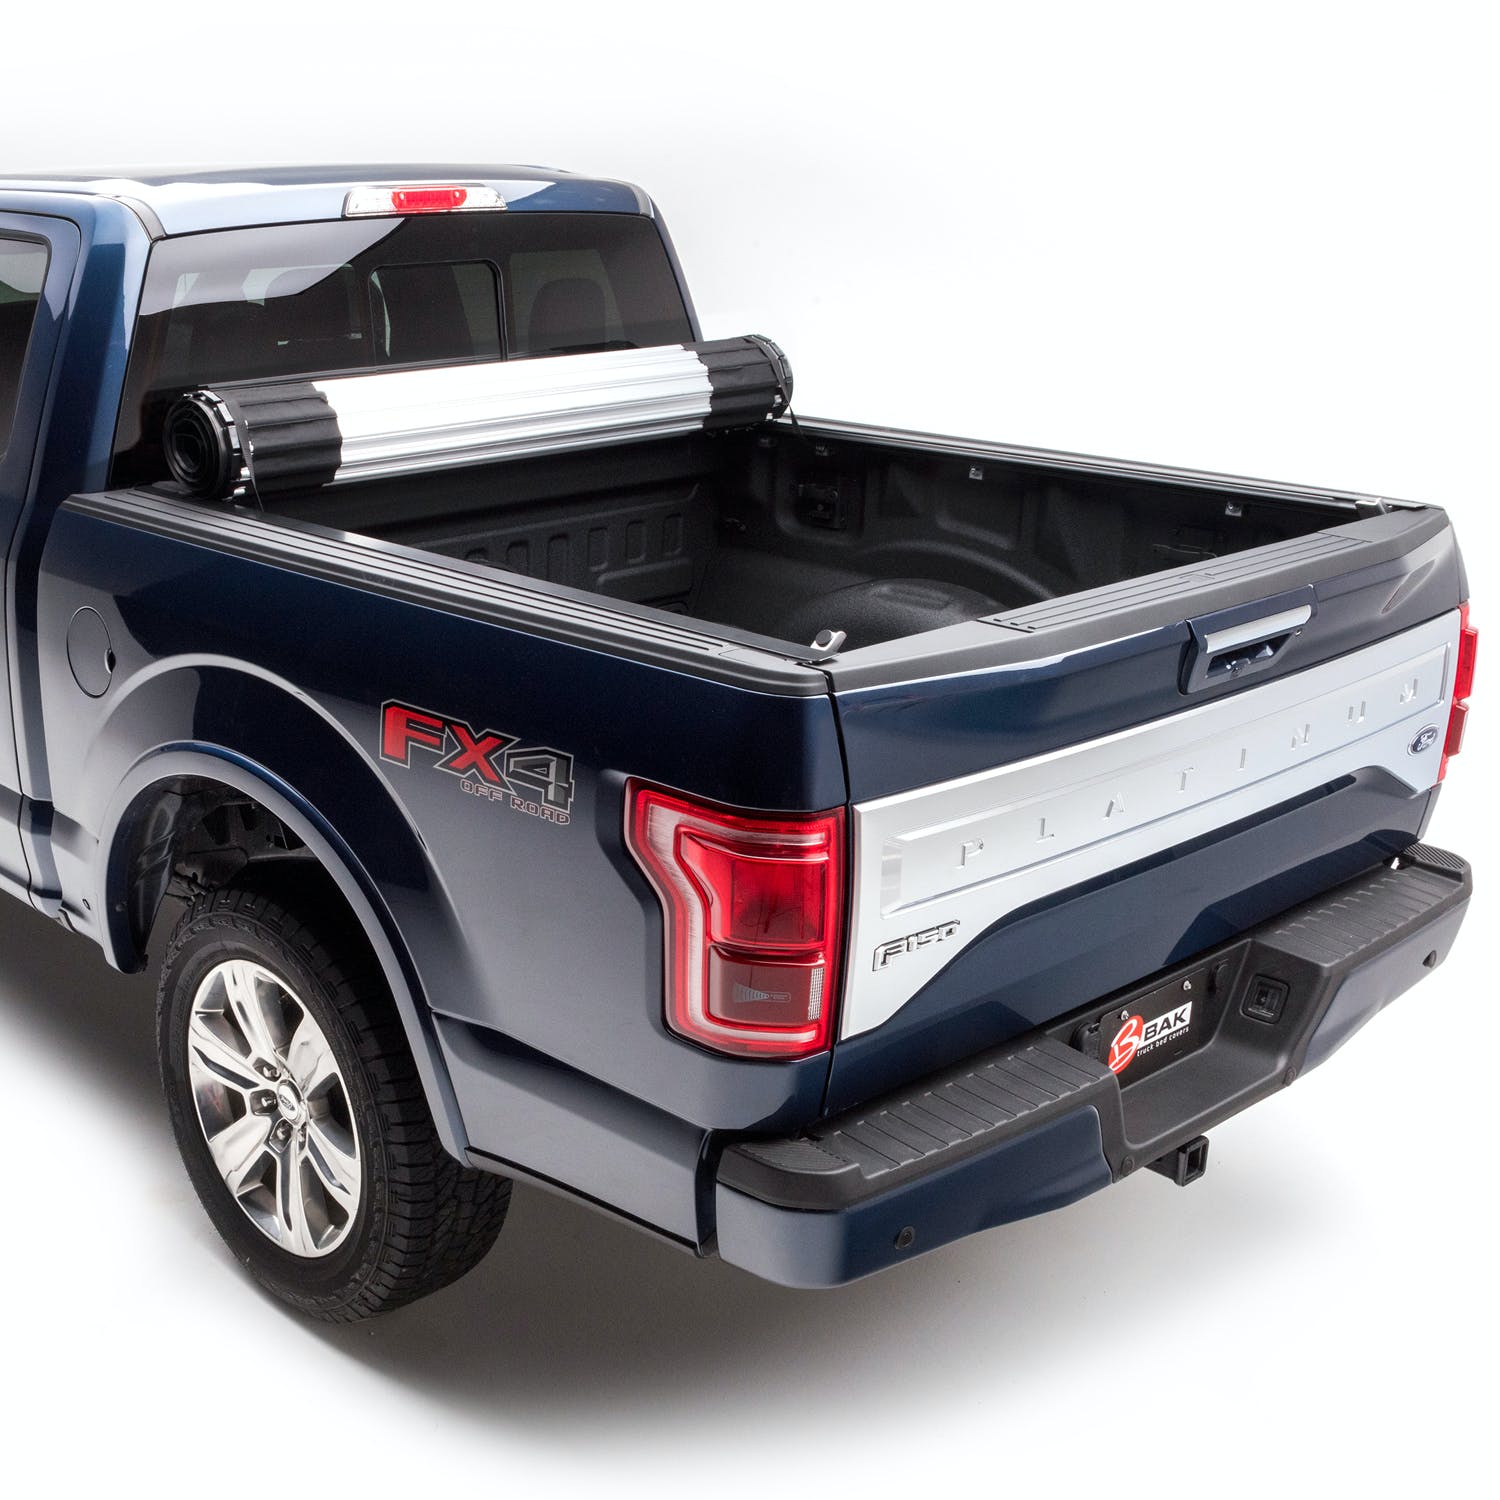 BAK Industries 39308 Revolver X2 Hard Rolling Truck Bed Cover